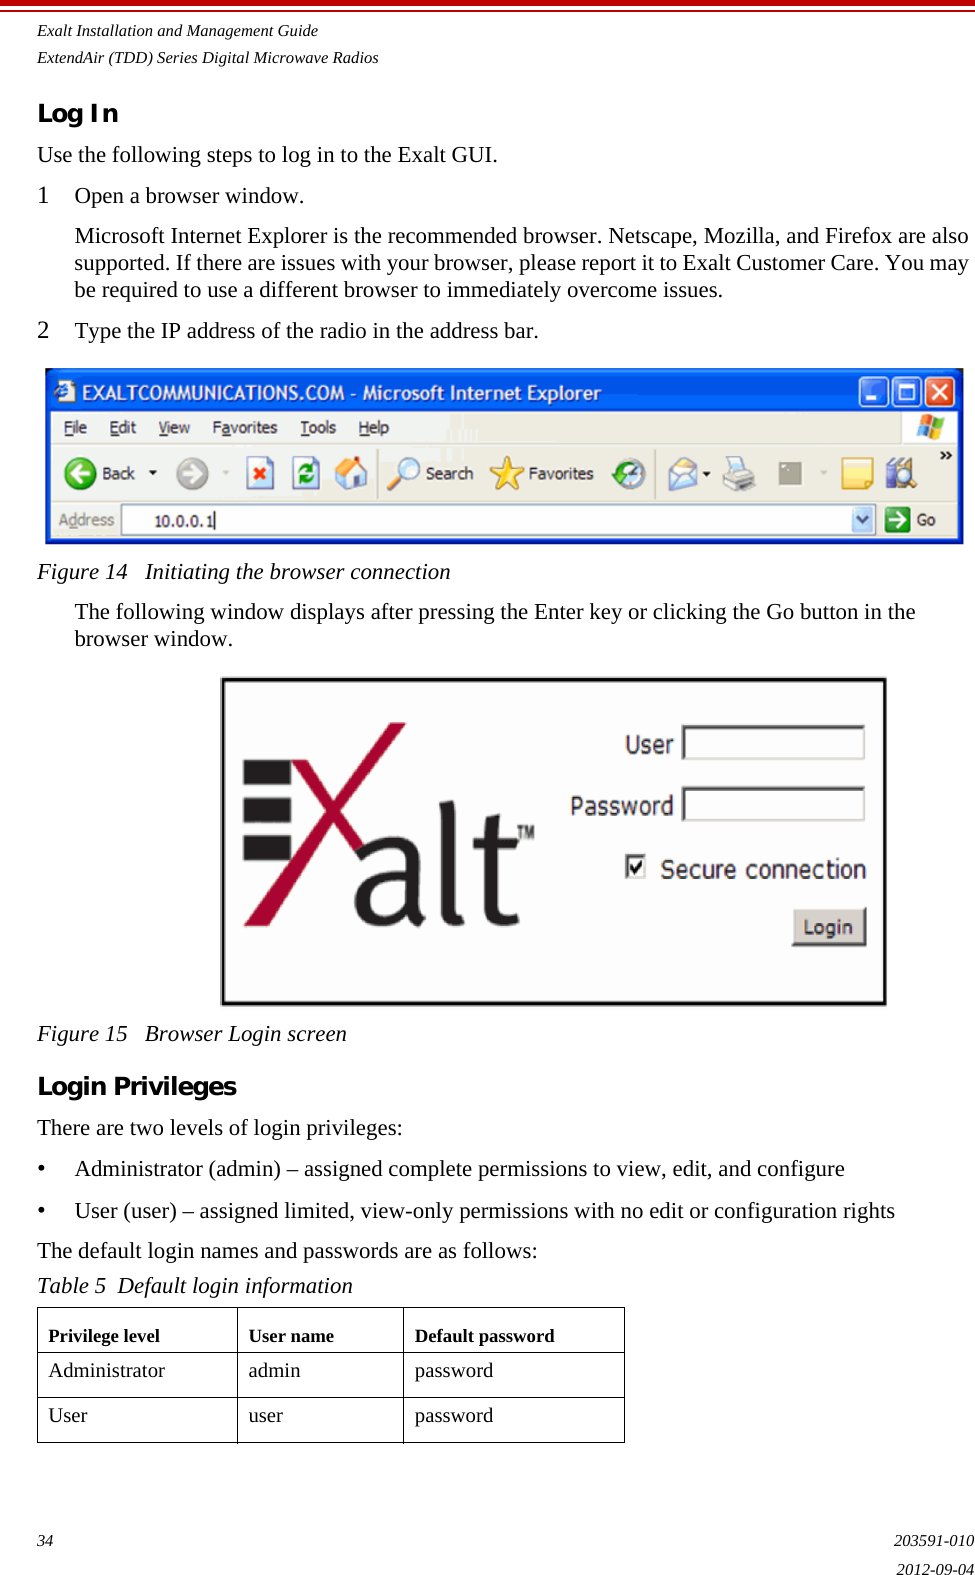 Exalt Installation and Management GuideExtendAir (TDD) Series Digital Microwave Radios34 203591-0102012-09-04Log InUse the following steps to log in to the Exalt GUI.1Open a browser window. Microsoft Internet Explorer is the recommended browser. Netscape, Mozilla, and Firefox are also supported. If there are issues with your browser, please report it to Exalt Customer Care. You may be required to use a different browser to immediately overcome issues.2Type the IP address of the radio in the address bar.Figure 14   Initiating the browser connectionThe following window displays after pressing the Enter key or clicking the Go button in the browser window.Figure 15   Browser Login screenLogin PrivilegesThere are two levels of login privileges:•Administrator (admin) – assigned complete permissions to view, edit, and configure•User (user) – assigned limited, view-only permissions with no edit or configuration rightsThe default login names and passwords are as follows:Table 5  Default login informationPrivilege level User name Default passwordAdministrator admin passwordUser user password